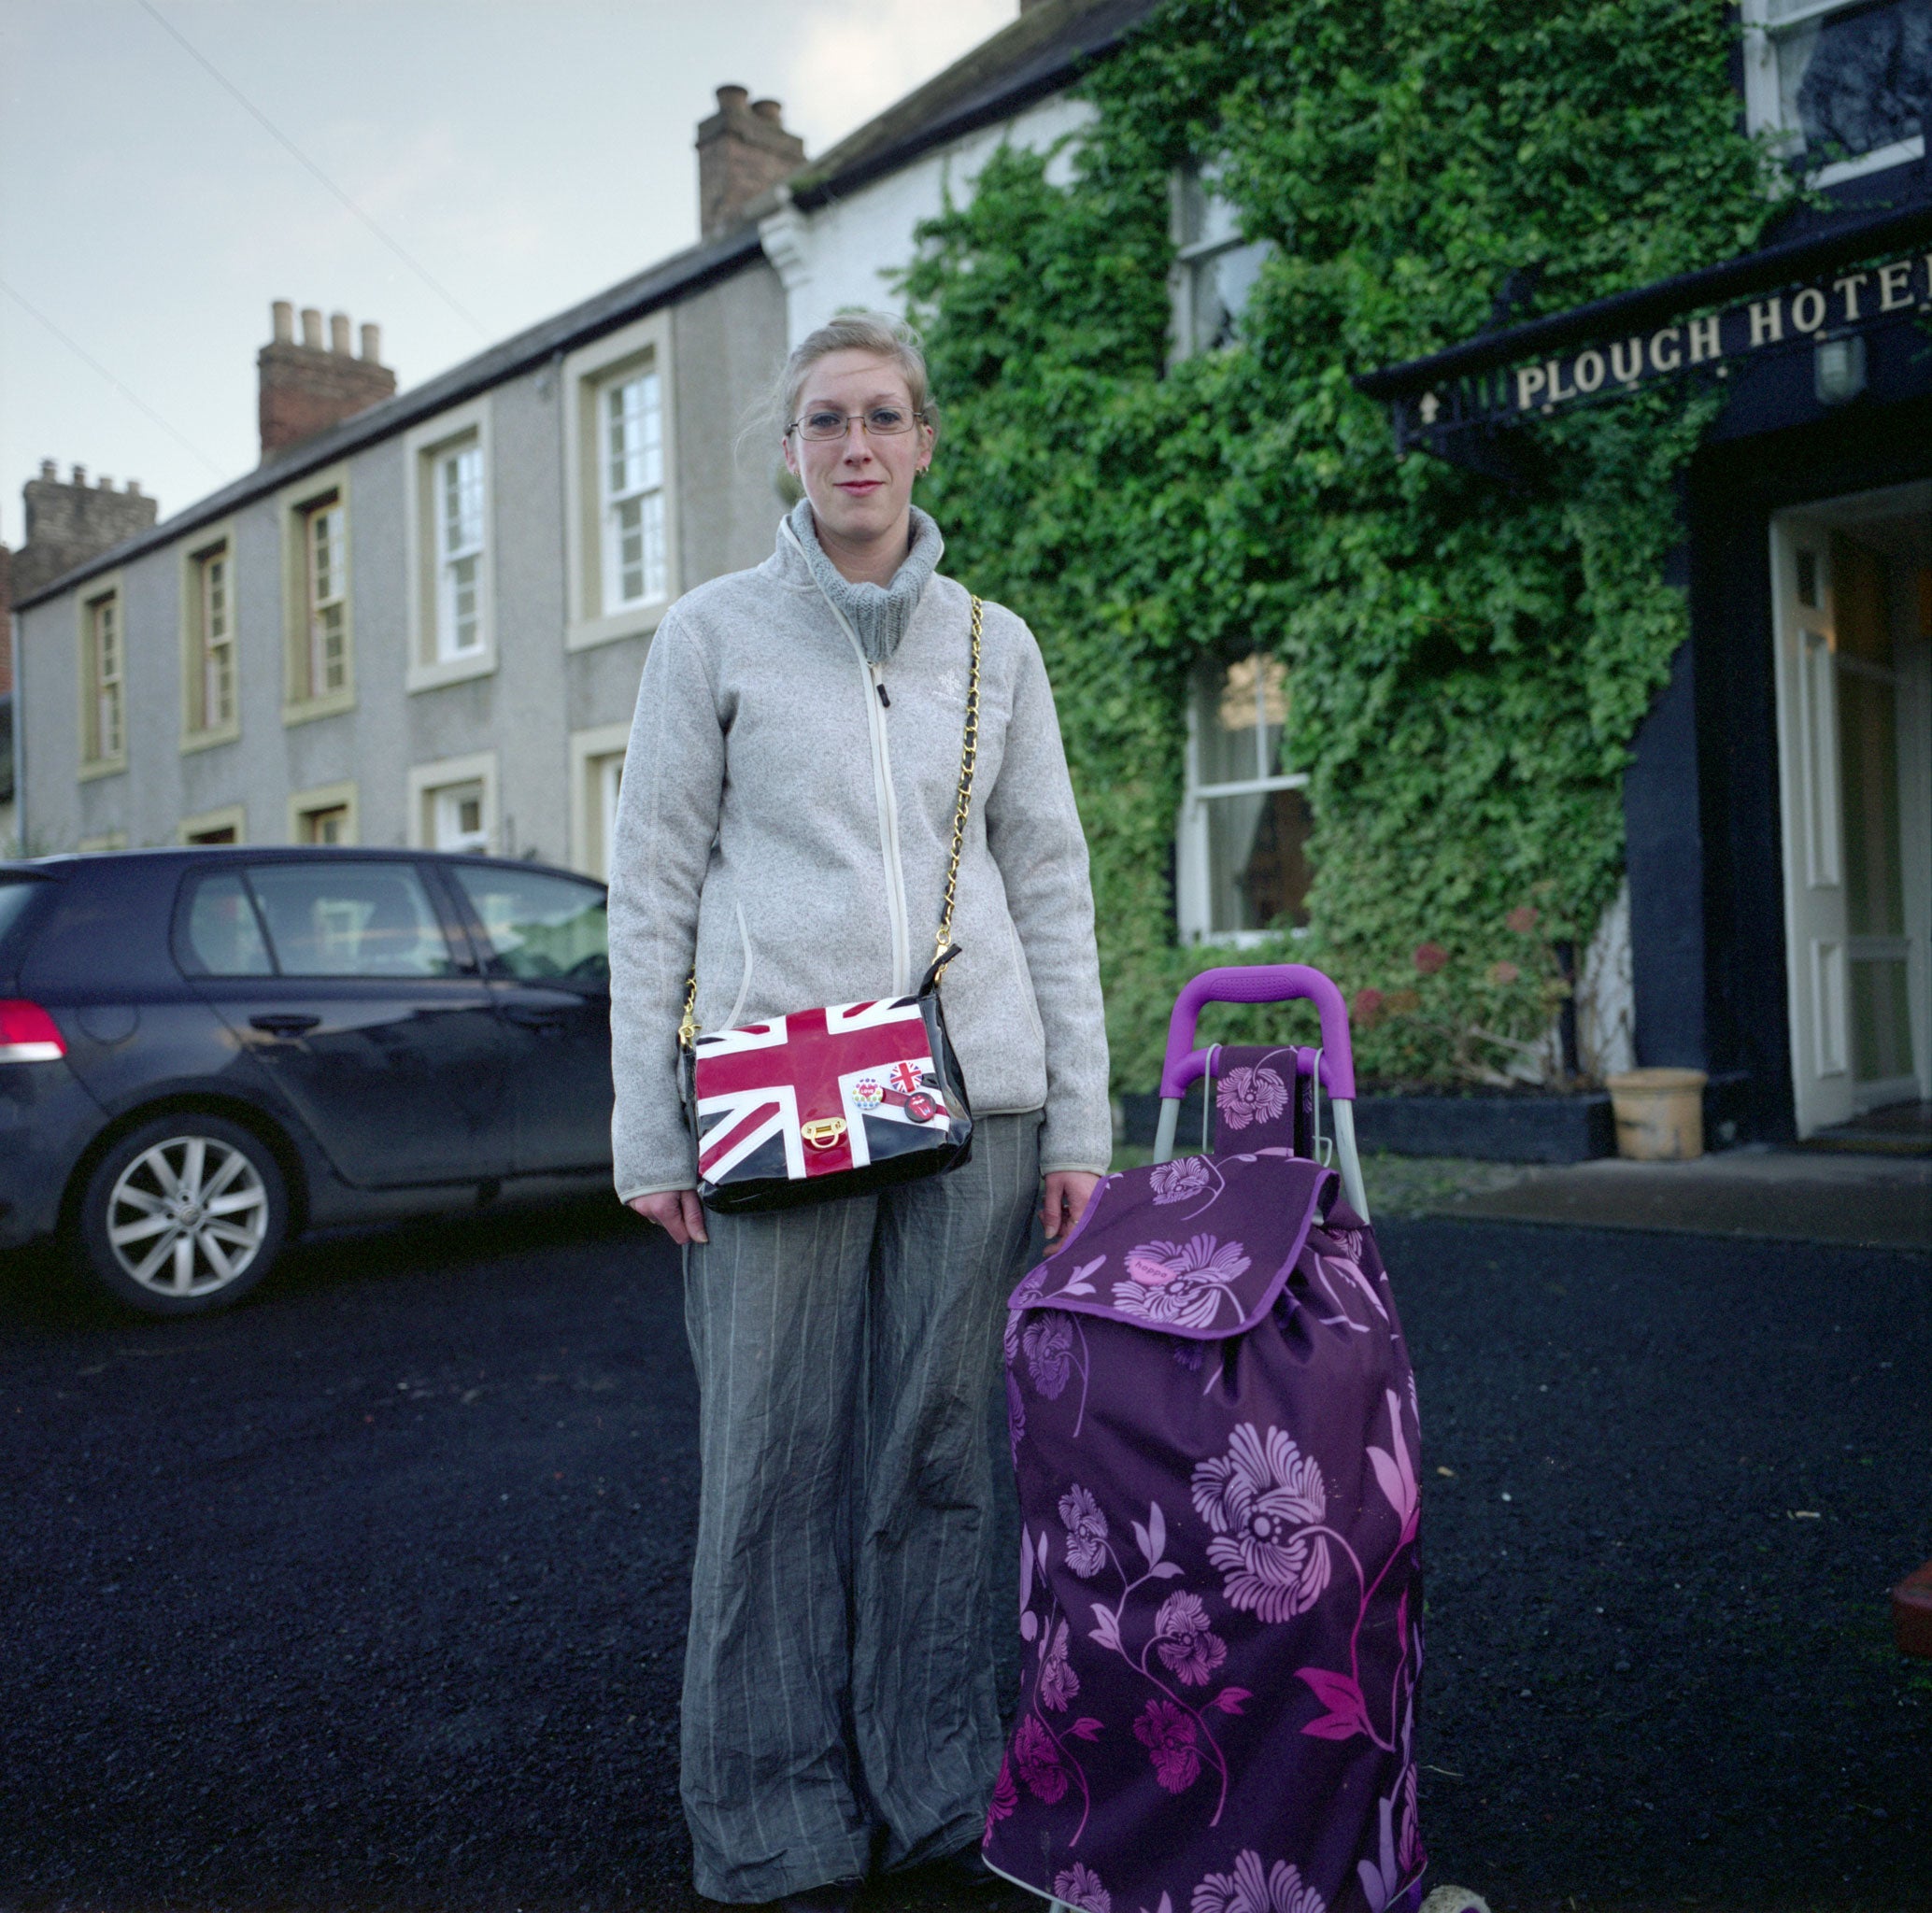 'Woman with a Union Jack Bag, Yetholm': this woman was waiting at a bus stop; she was heading to nearby Kelso to go shopping